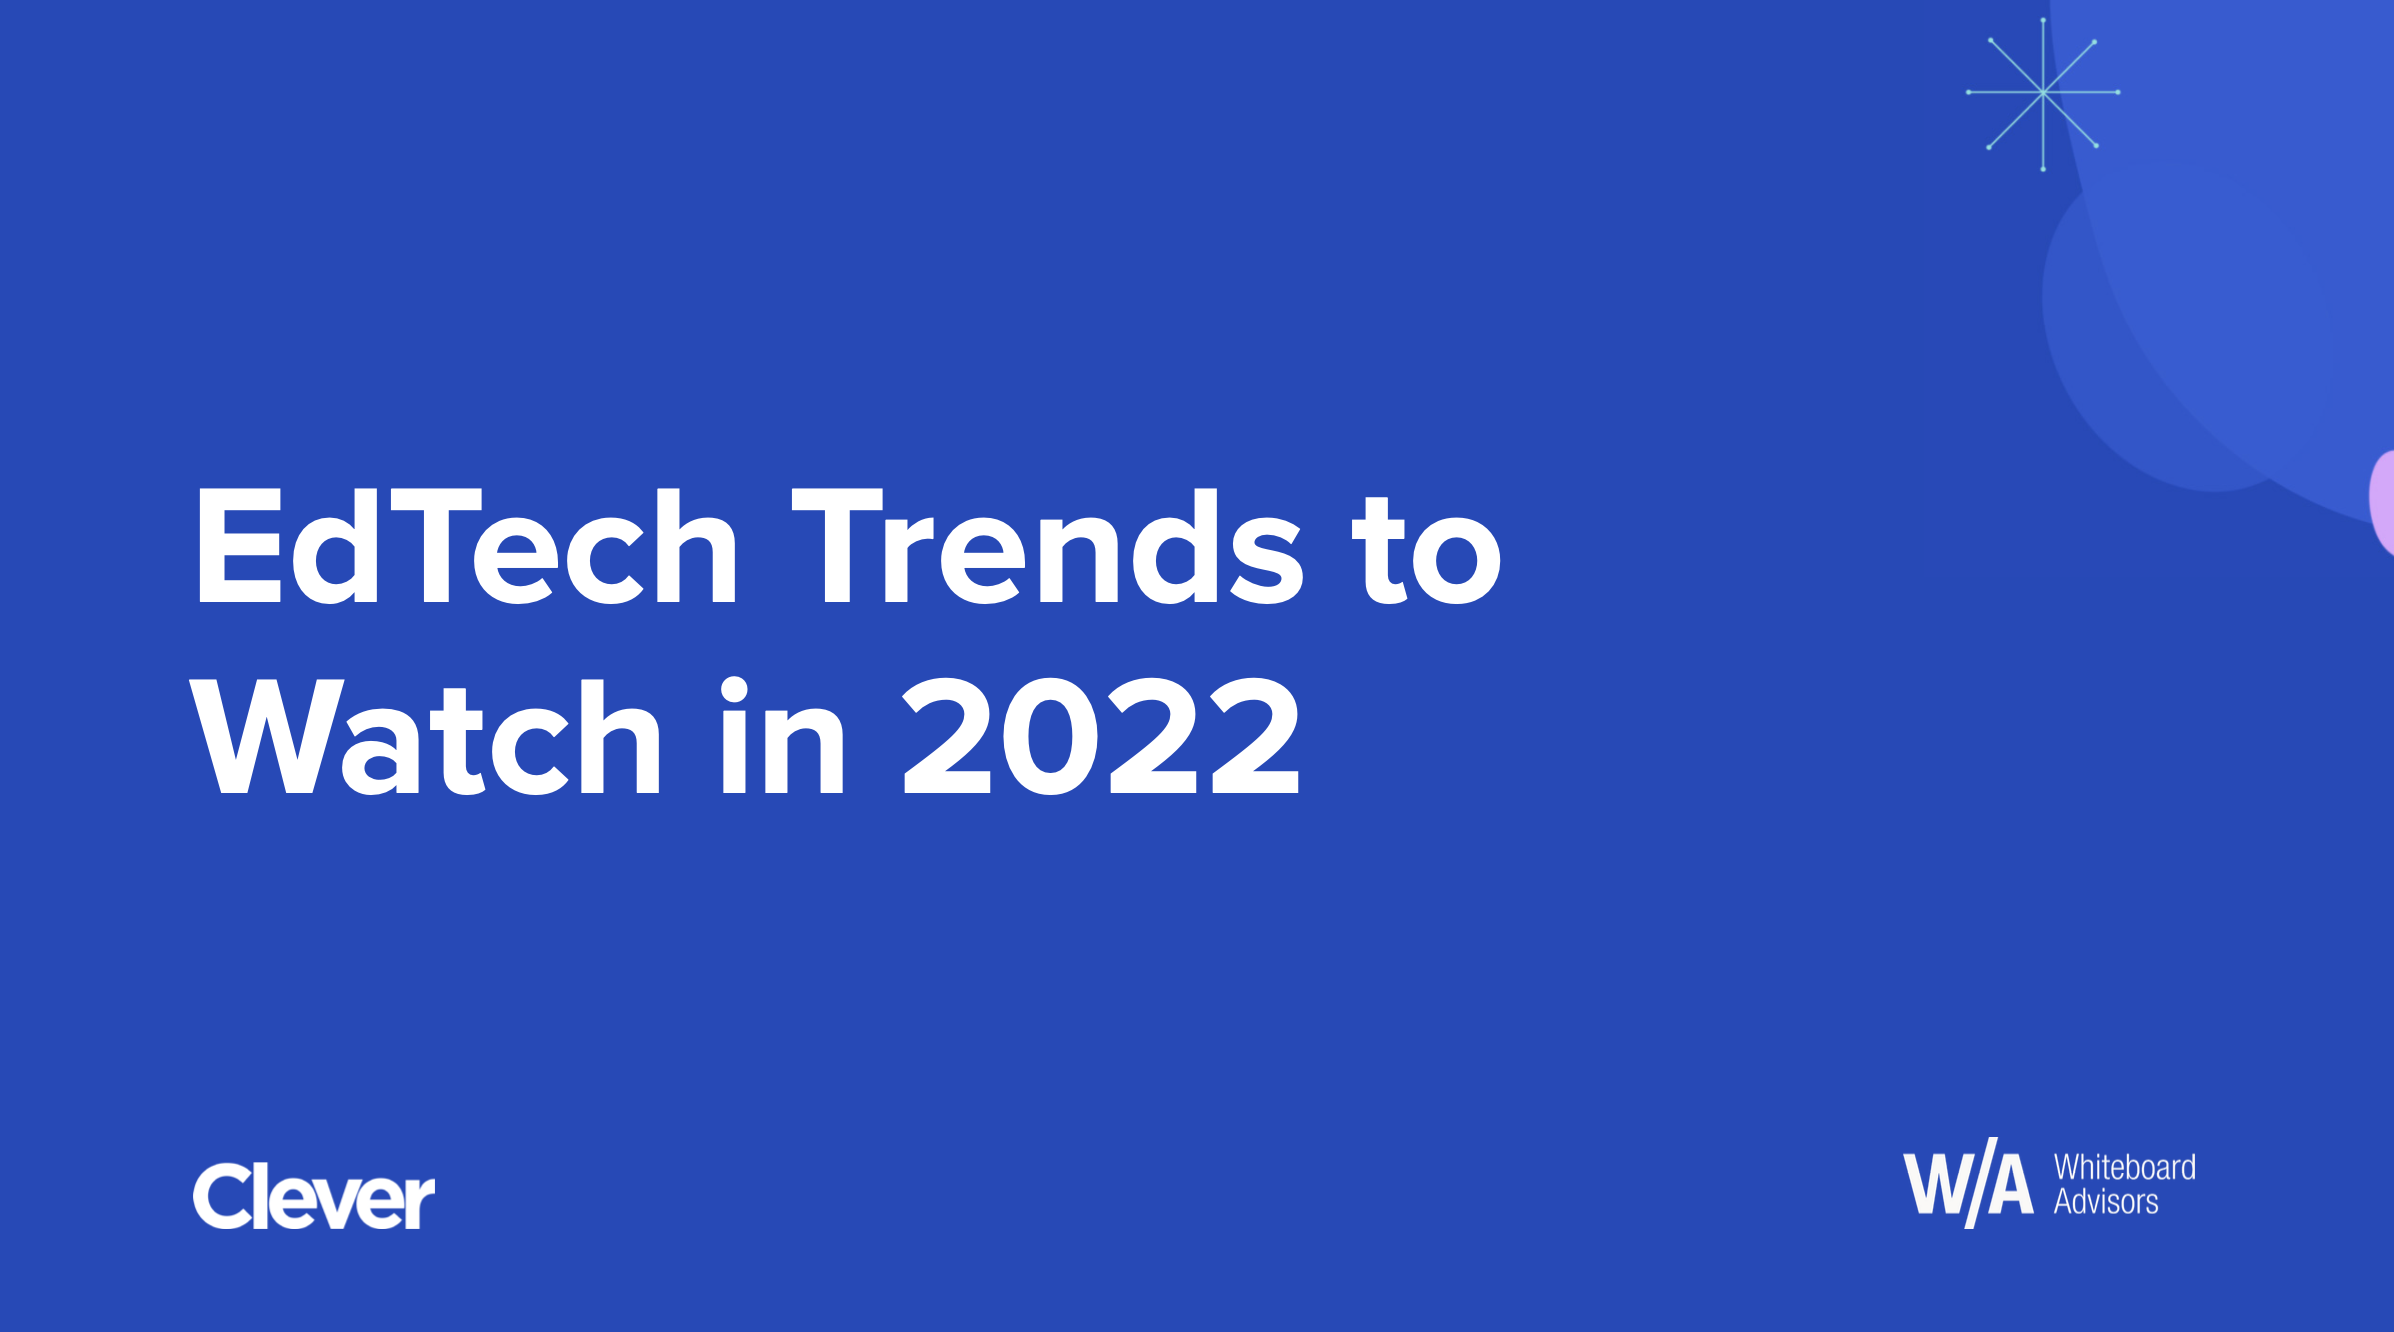 Cover image of 2022 edtech trends report